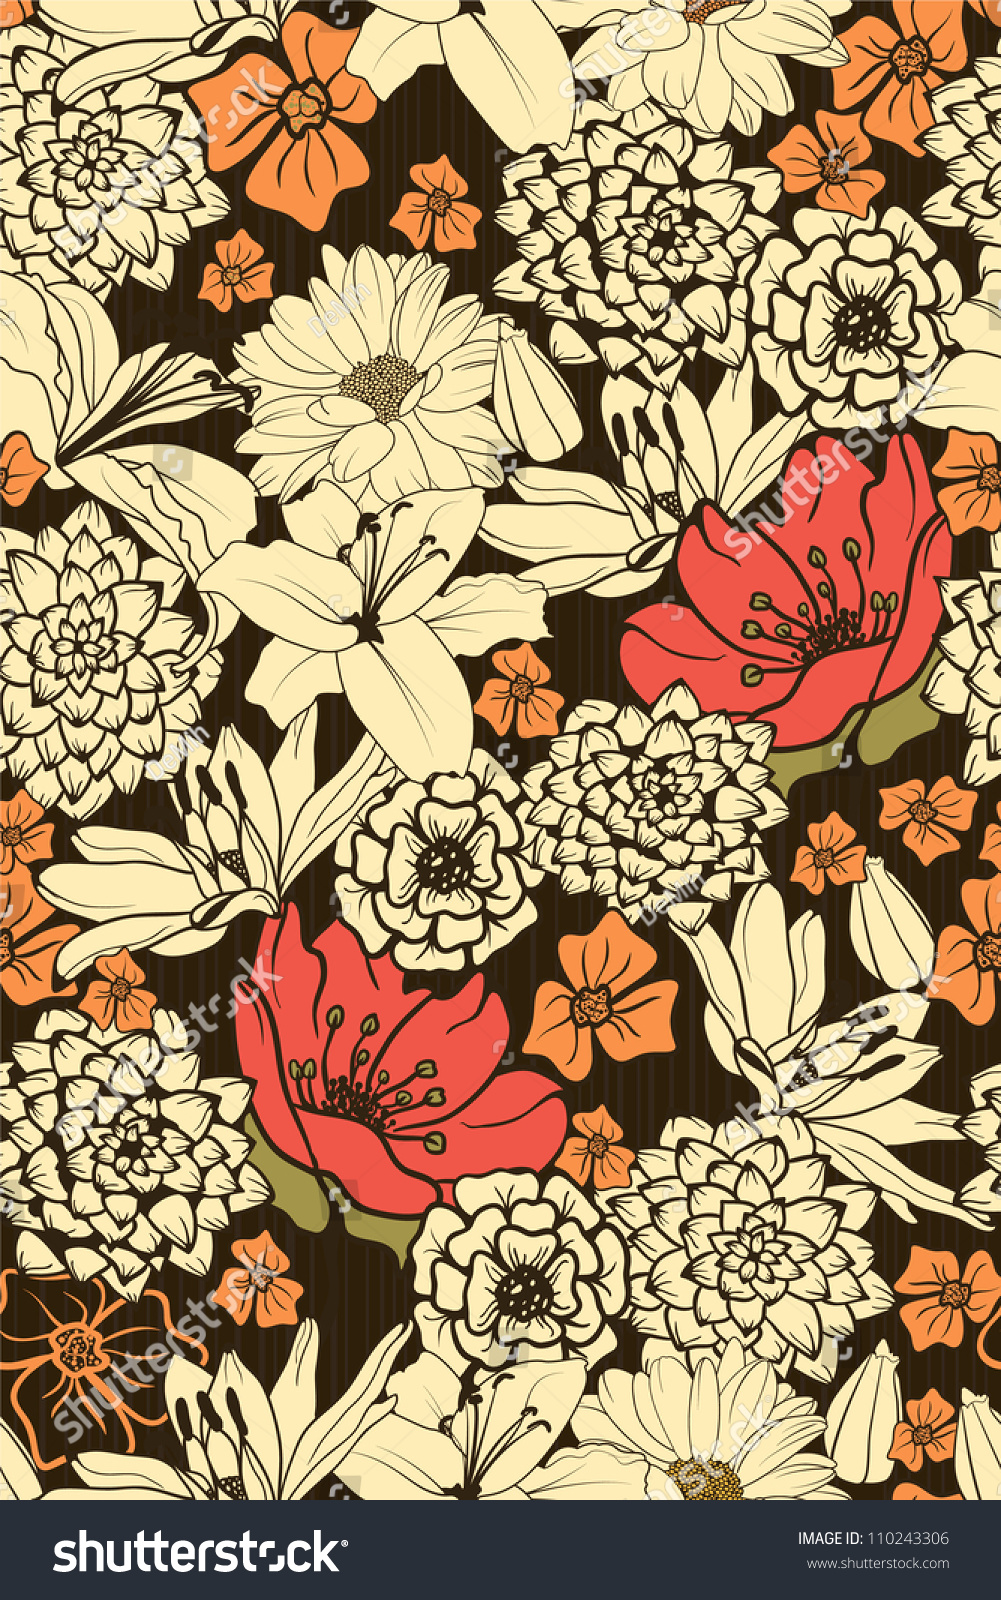 Seamless Floral Pattern Red Flowers Stock Vector 110243306 - Shutterstock